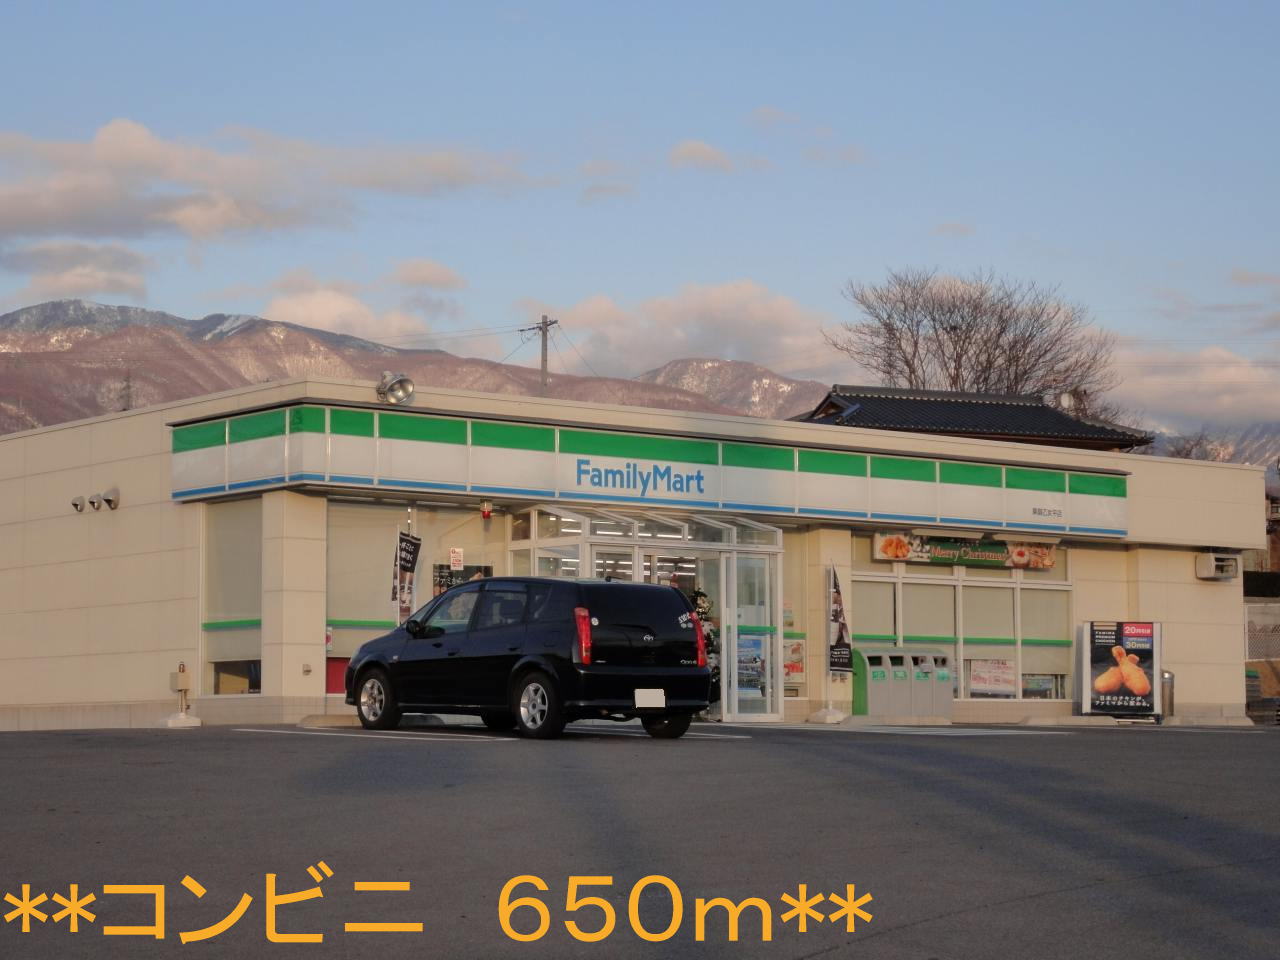 Convenience store. FamilyMart east your maiden Hiramise (convenience store) to 650m